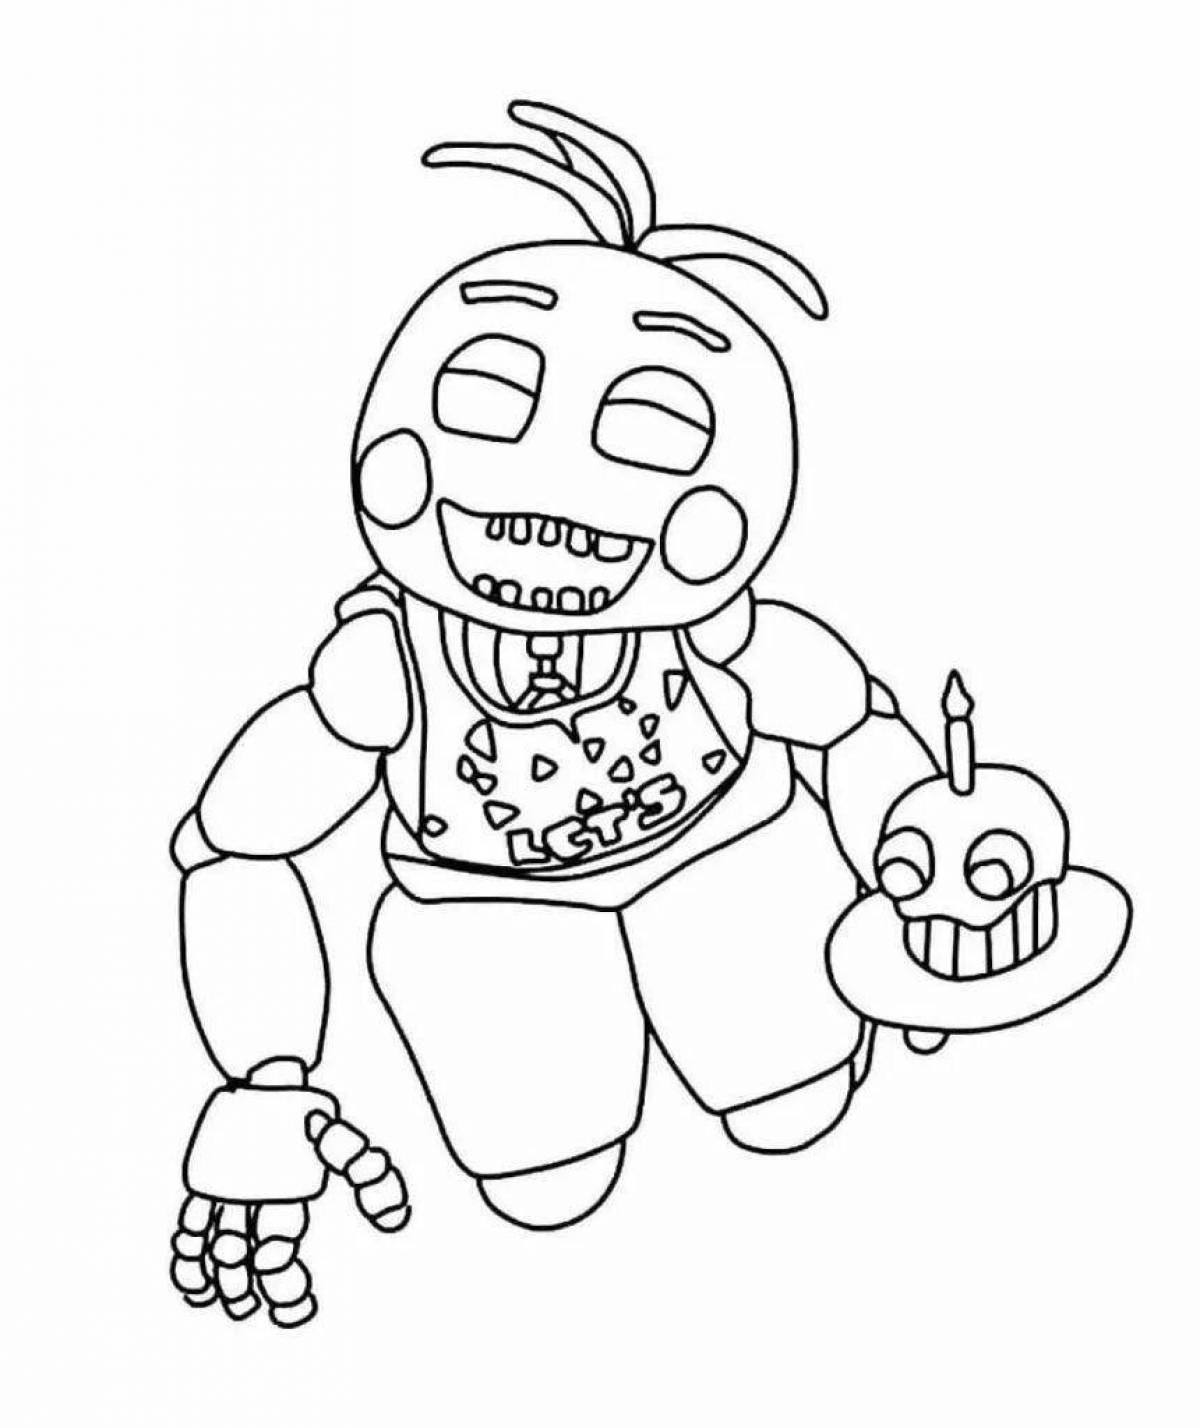 Freddy's gorgeous glam rock coloring page